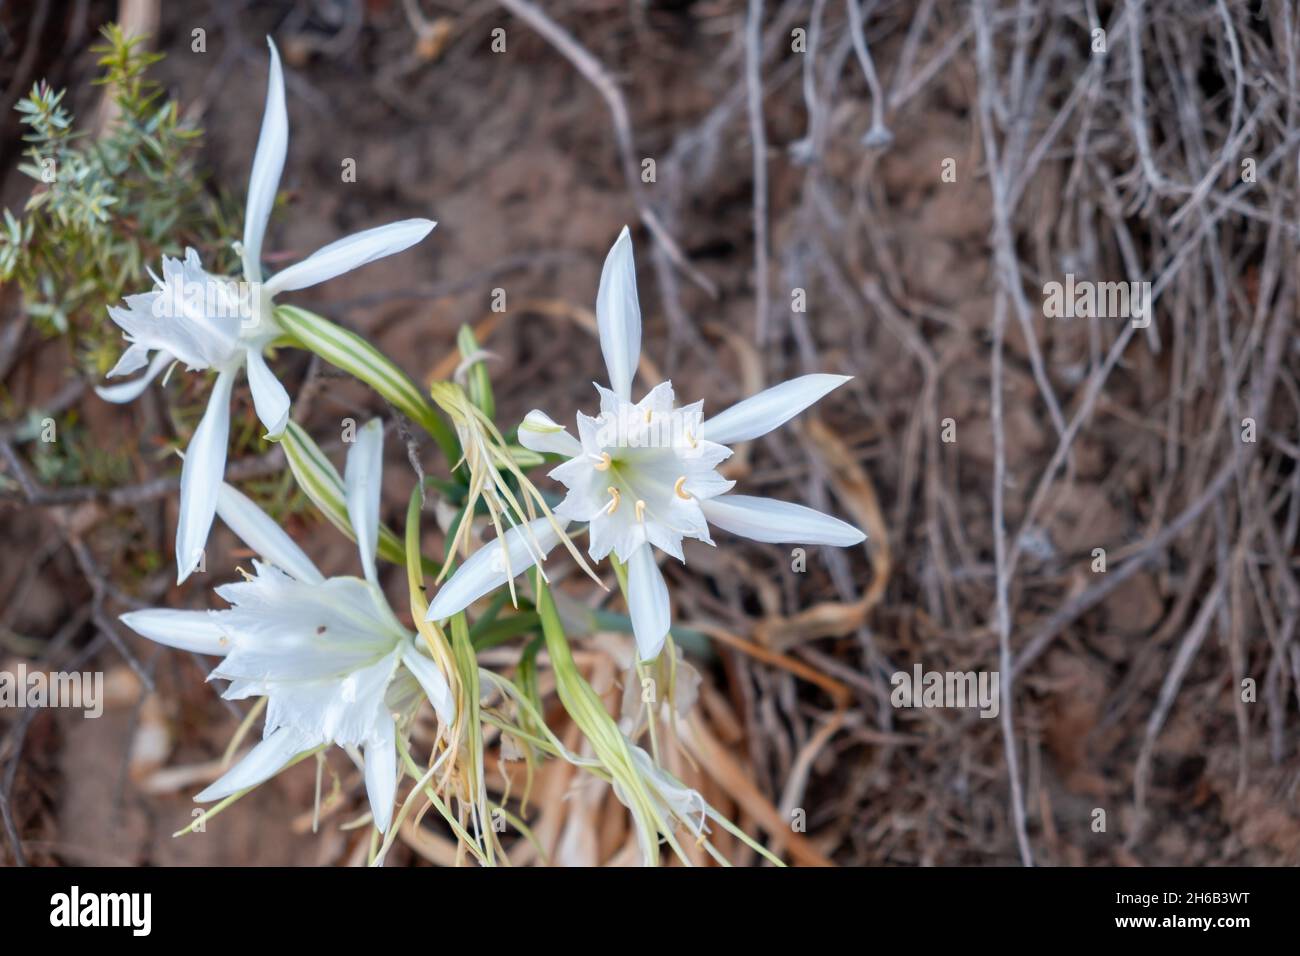 Pancratium maritimum or sea daffodil is a perennial evergreen wild plant with white flowers. Sand lily with sun help born and grows in sandy soil at s Stock Photo